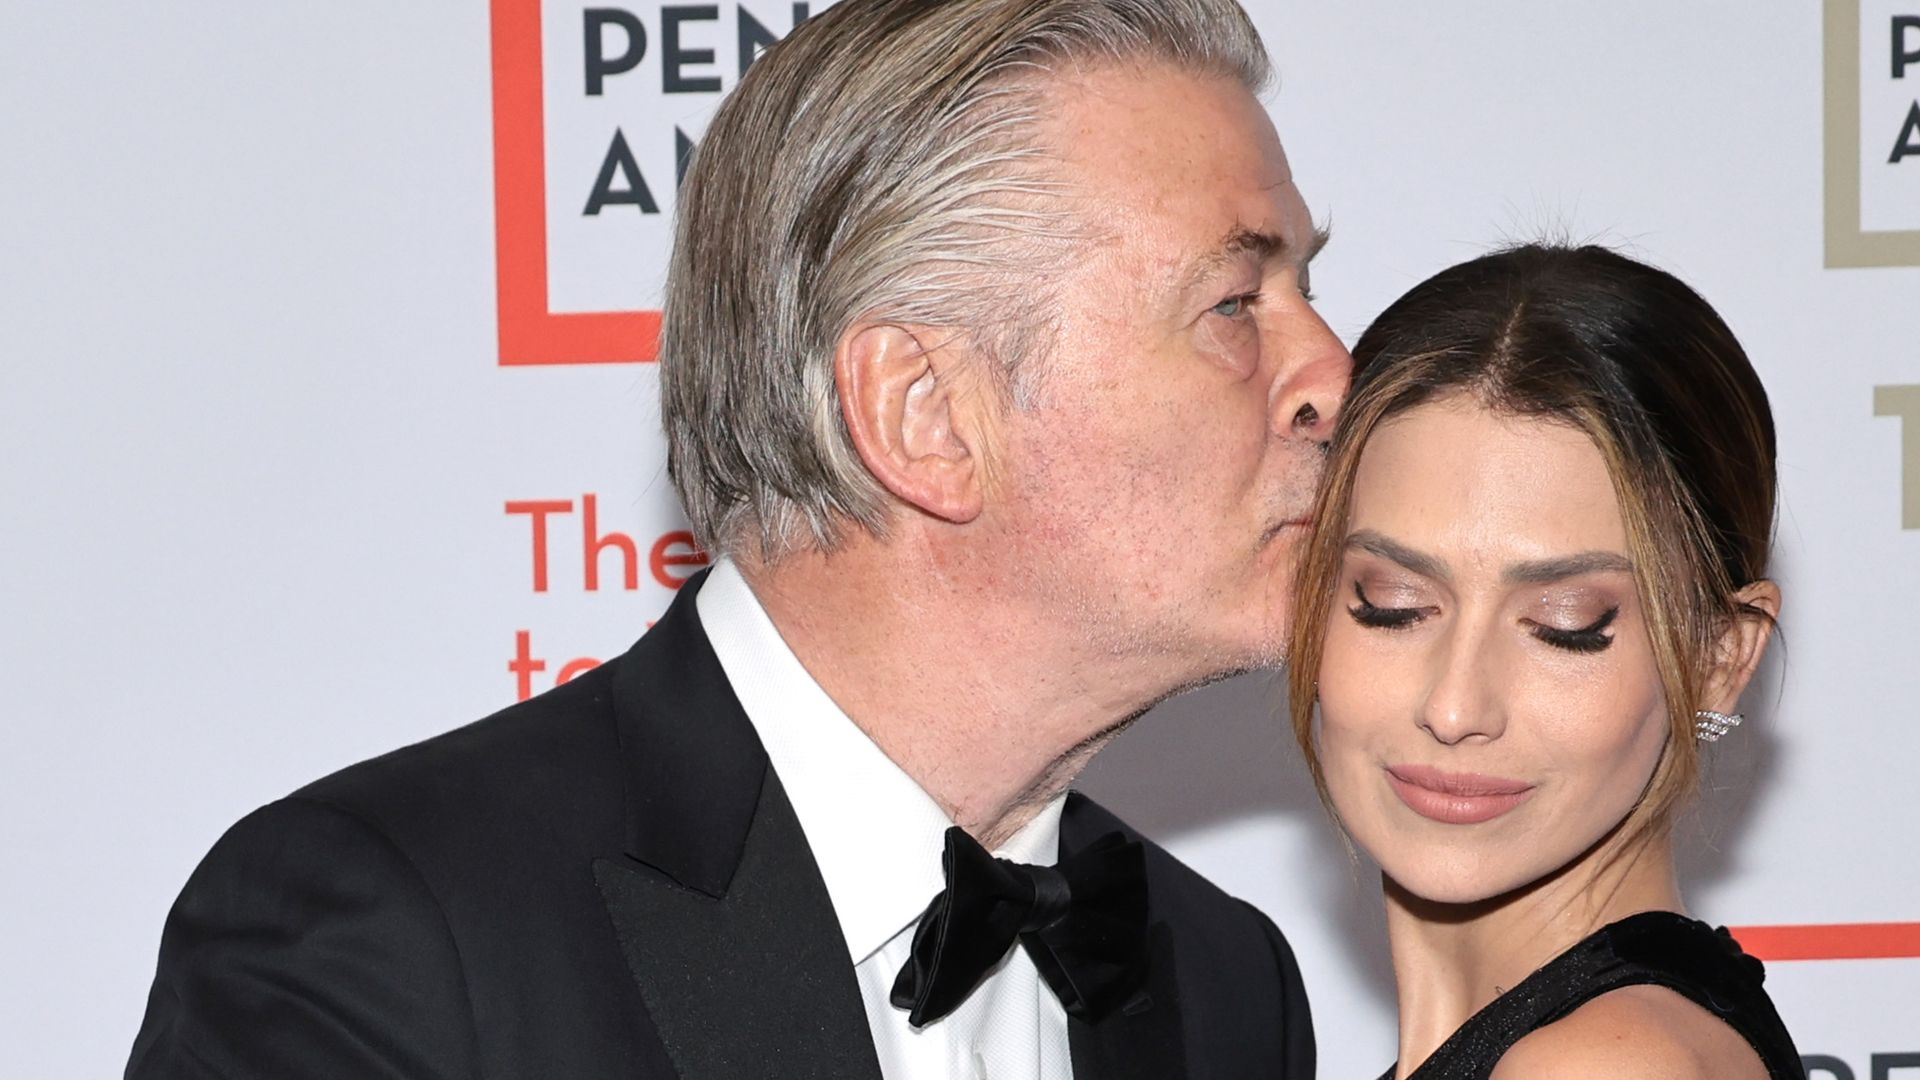 Alec Baldwin and wife Hilaria make first red carpet appearance since charges from fatal shooting were dropped